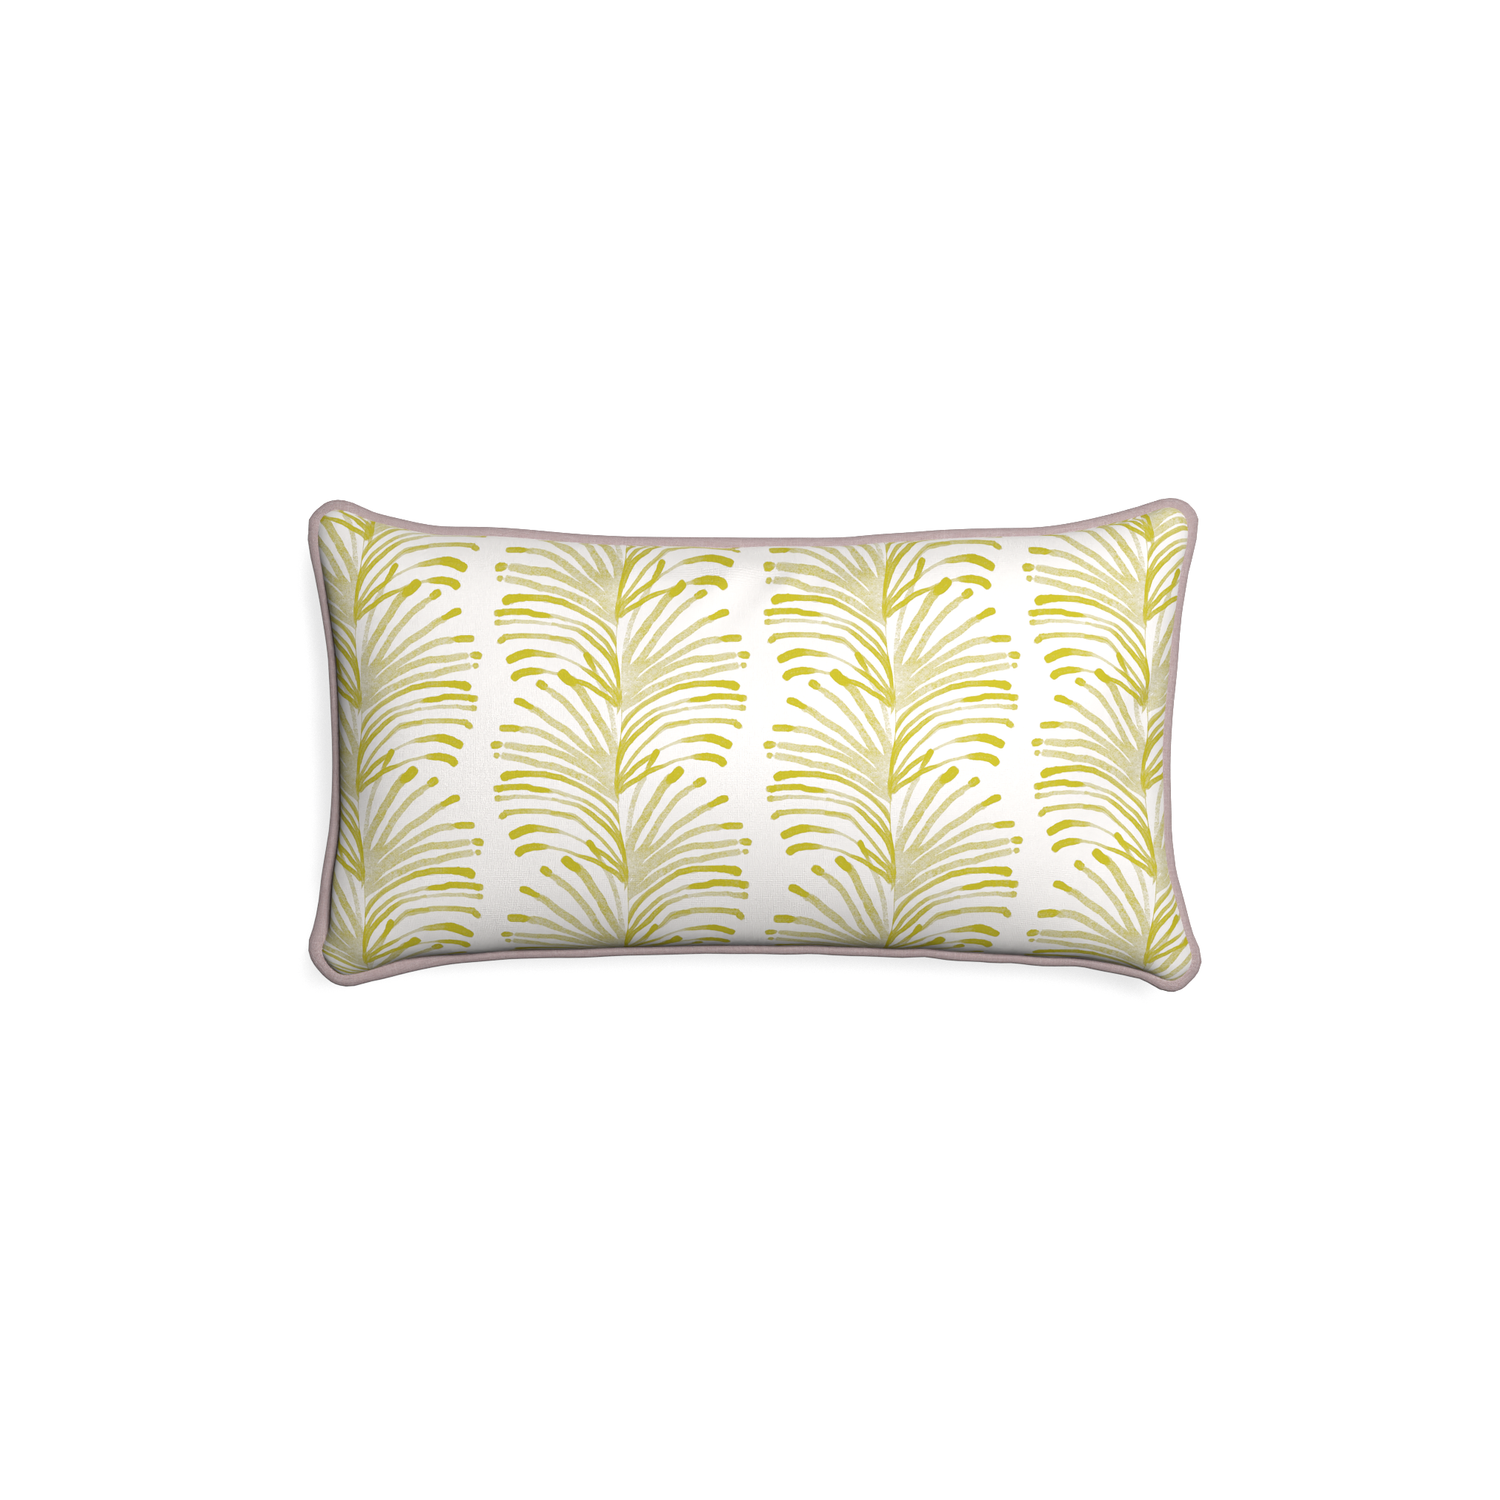 Petite-lumbar emma chartreuse custom yellow stripe chartreusepillow with orchid piping on white background